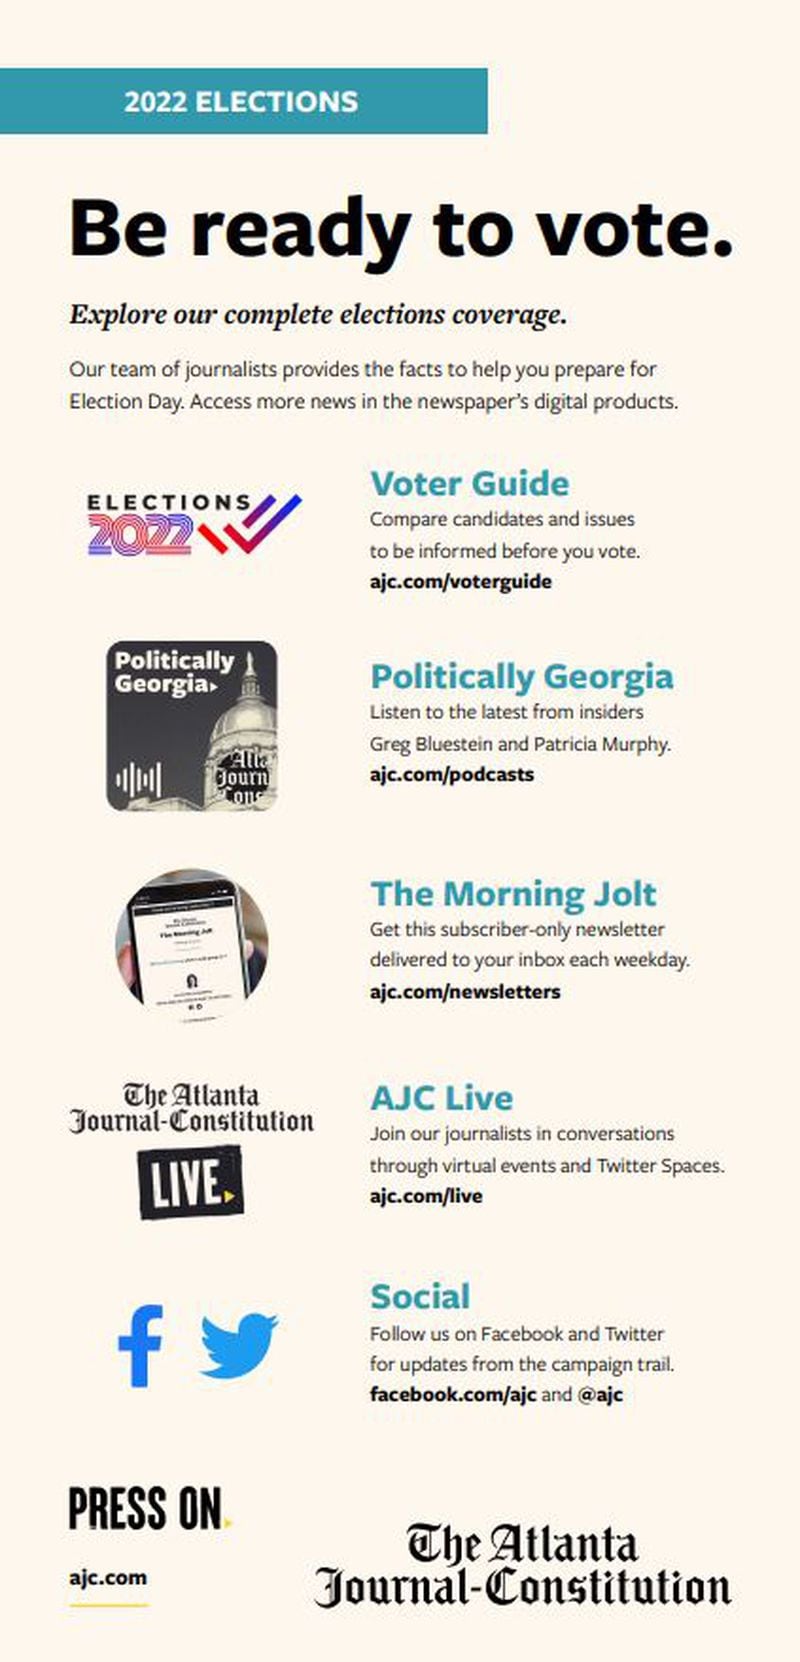 Resources to help you prepare for Election Day in Georgia